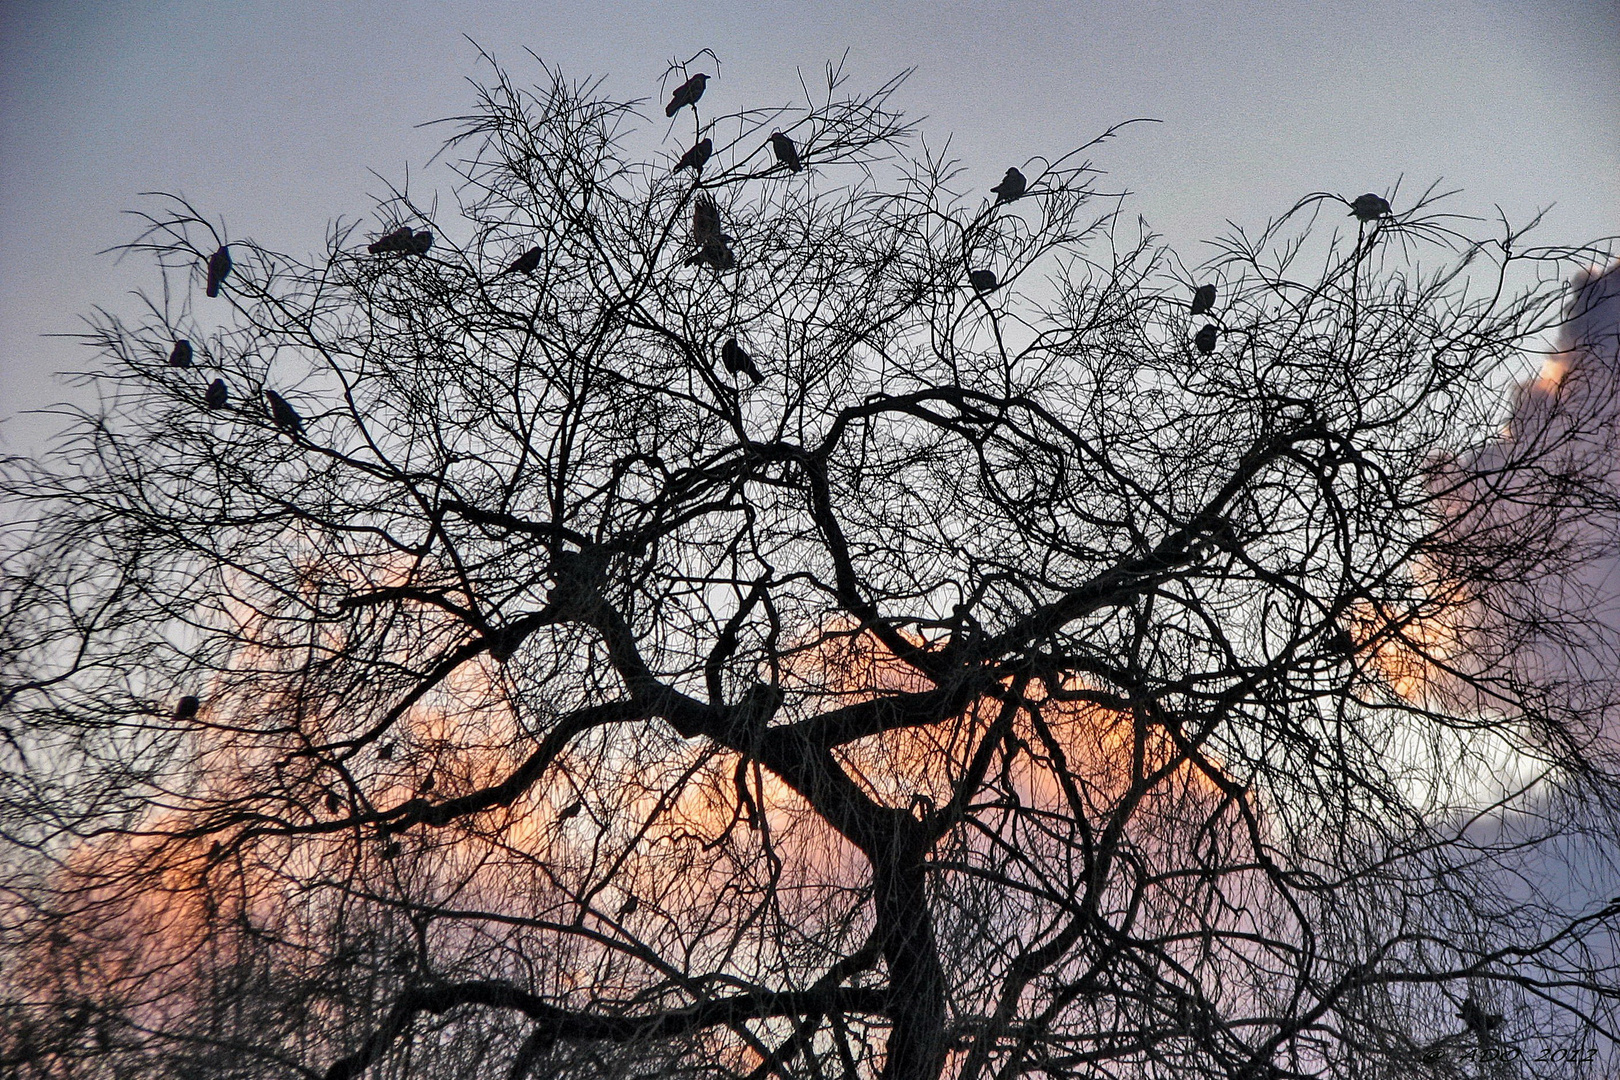 The Crows at Trout Lake